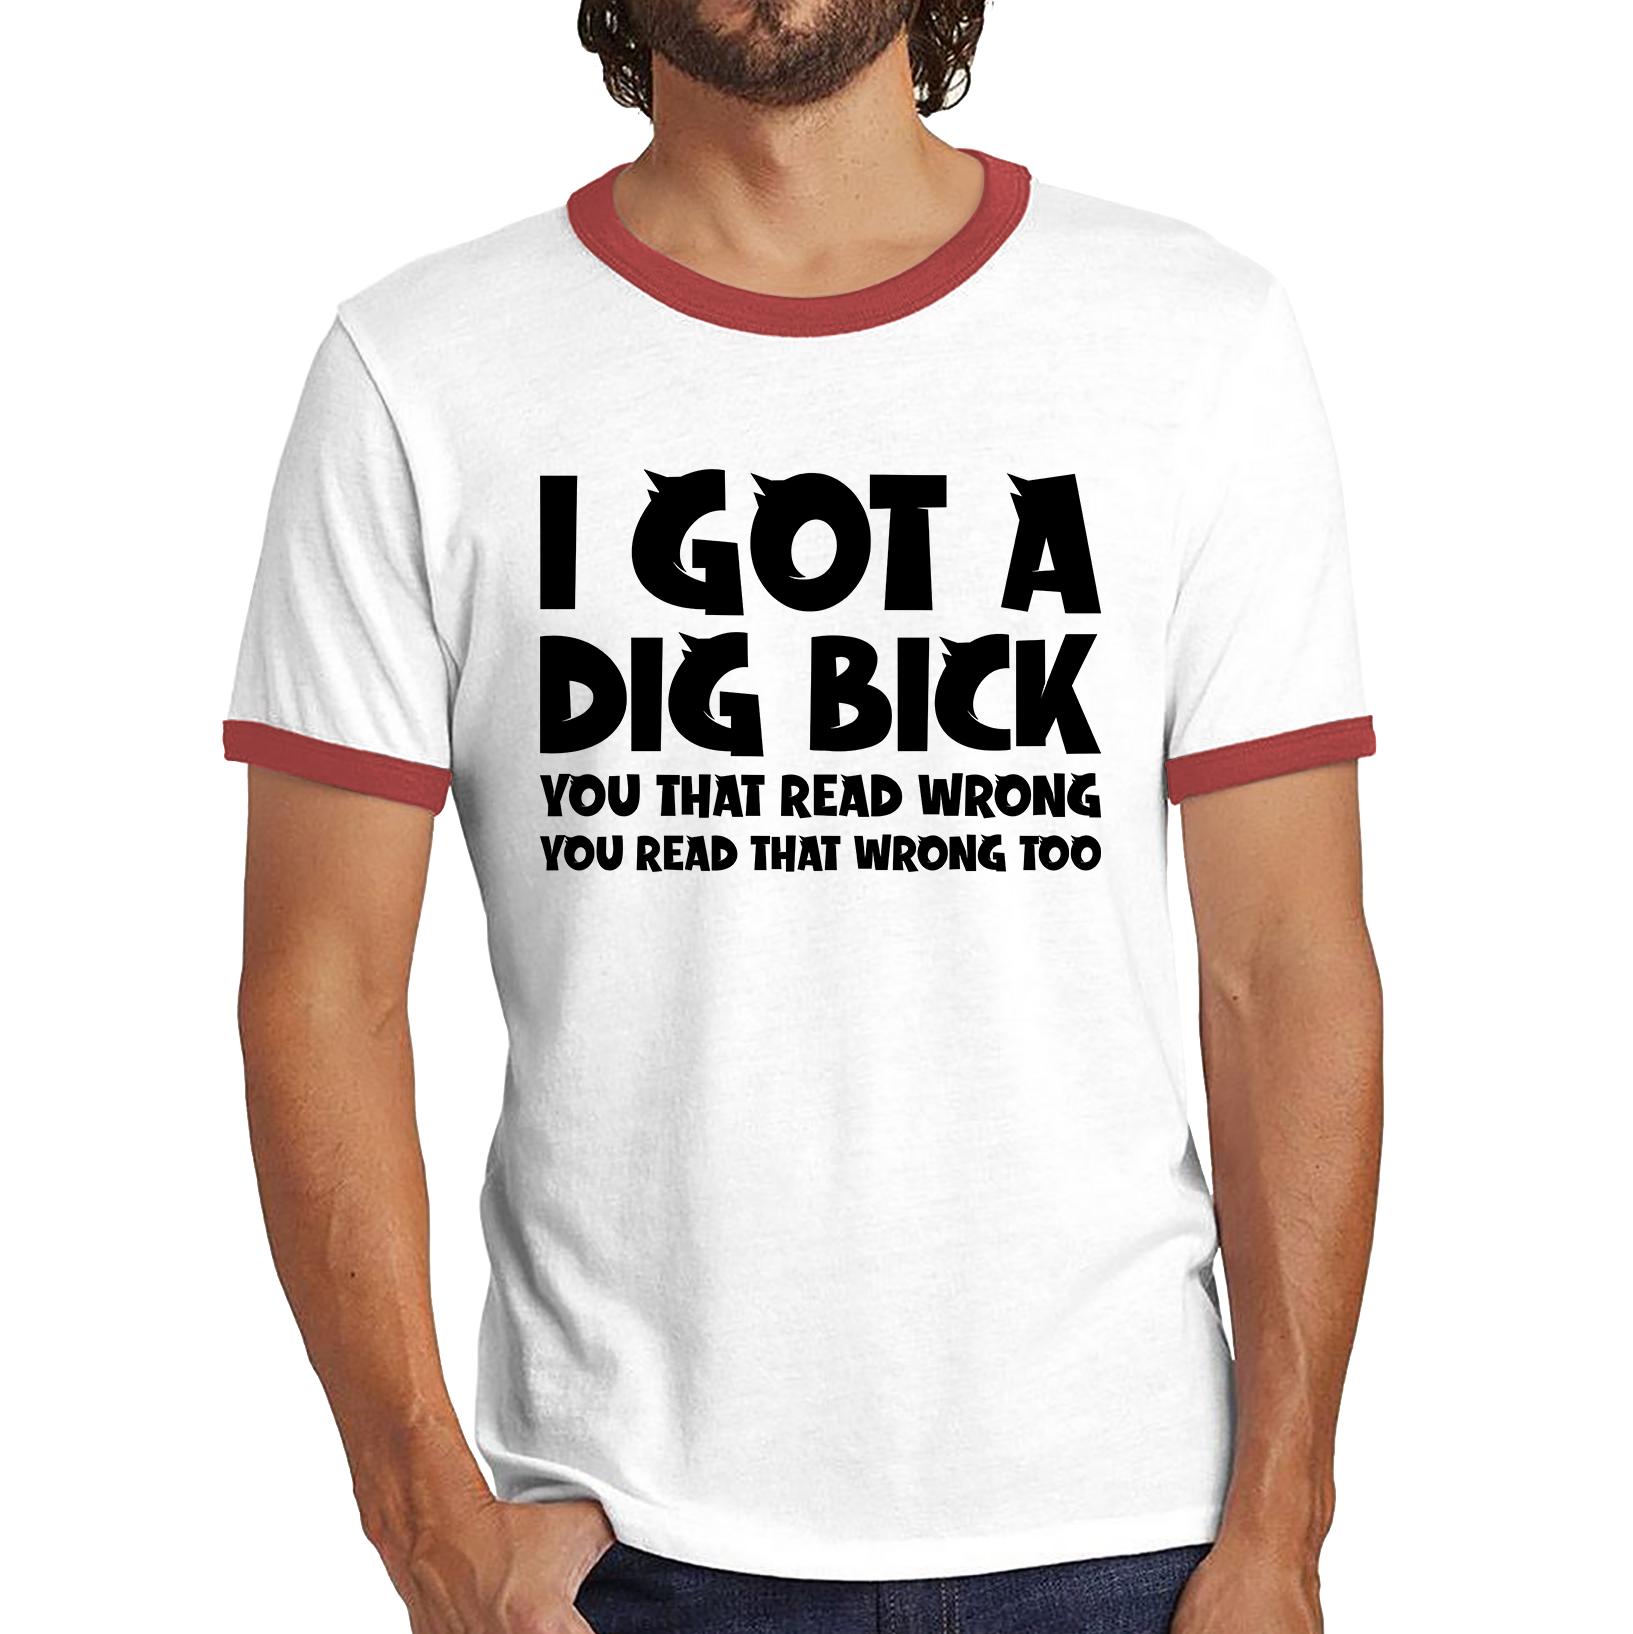 I Got A Dig Bick You That Read Wrong You Read That Wrong Too Funny Novelty Sarcastic Humour Ringer T Shirt